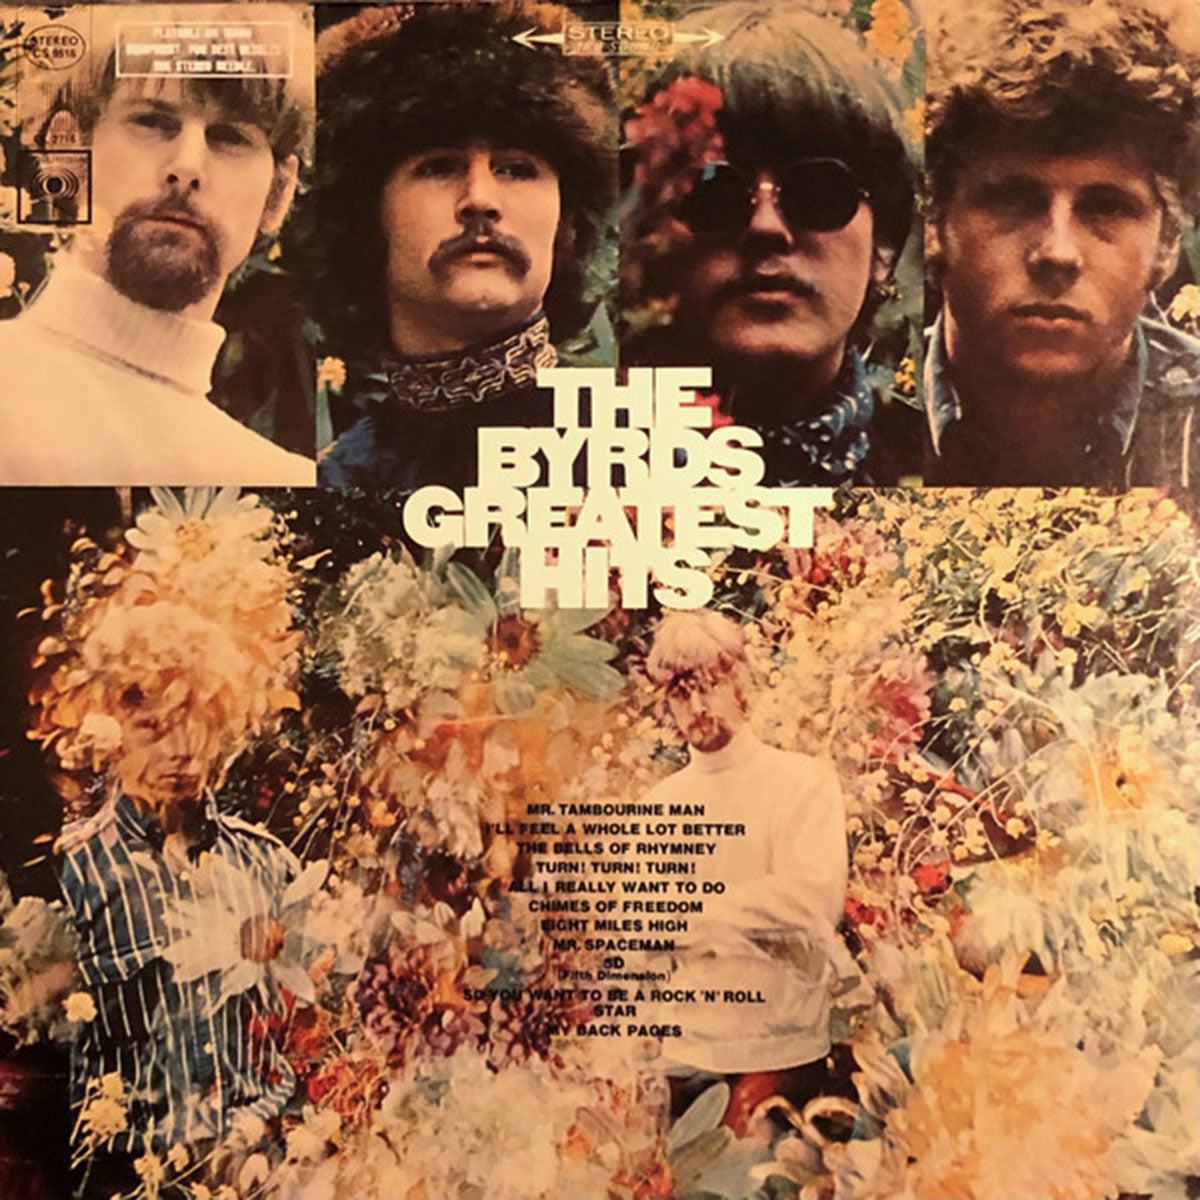 The Byrds – The Byrds' Greatest Hits - Rare